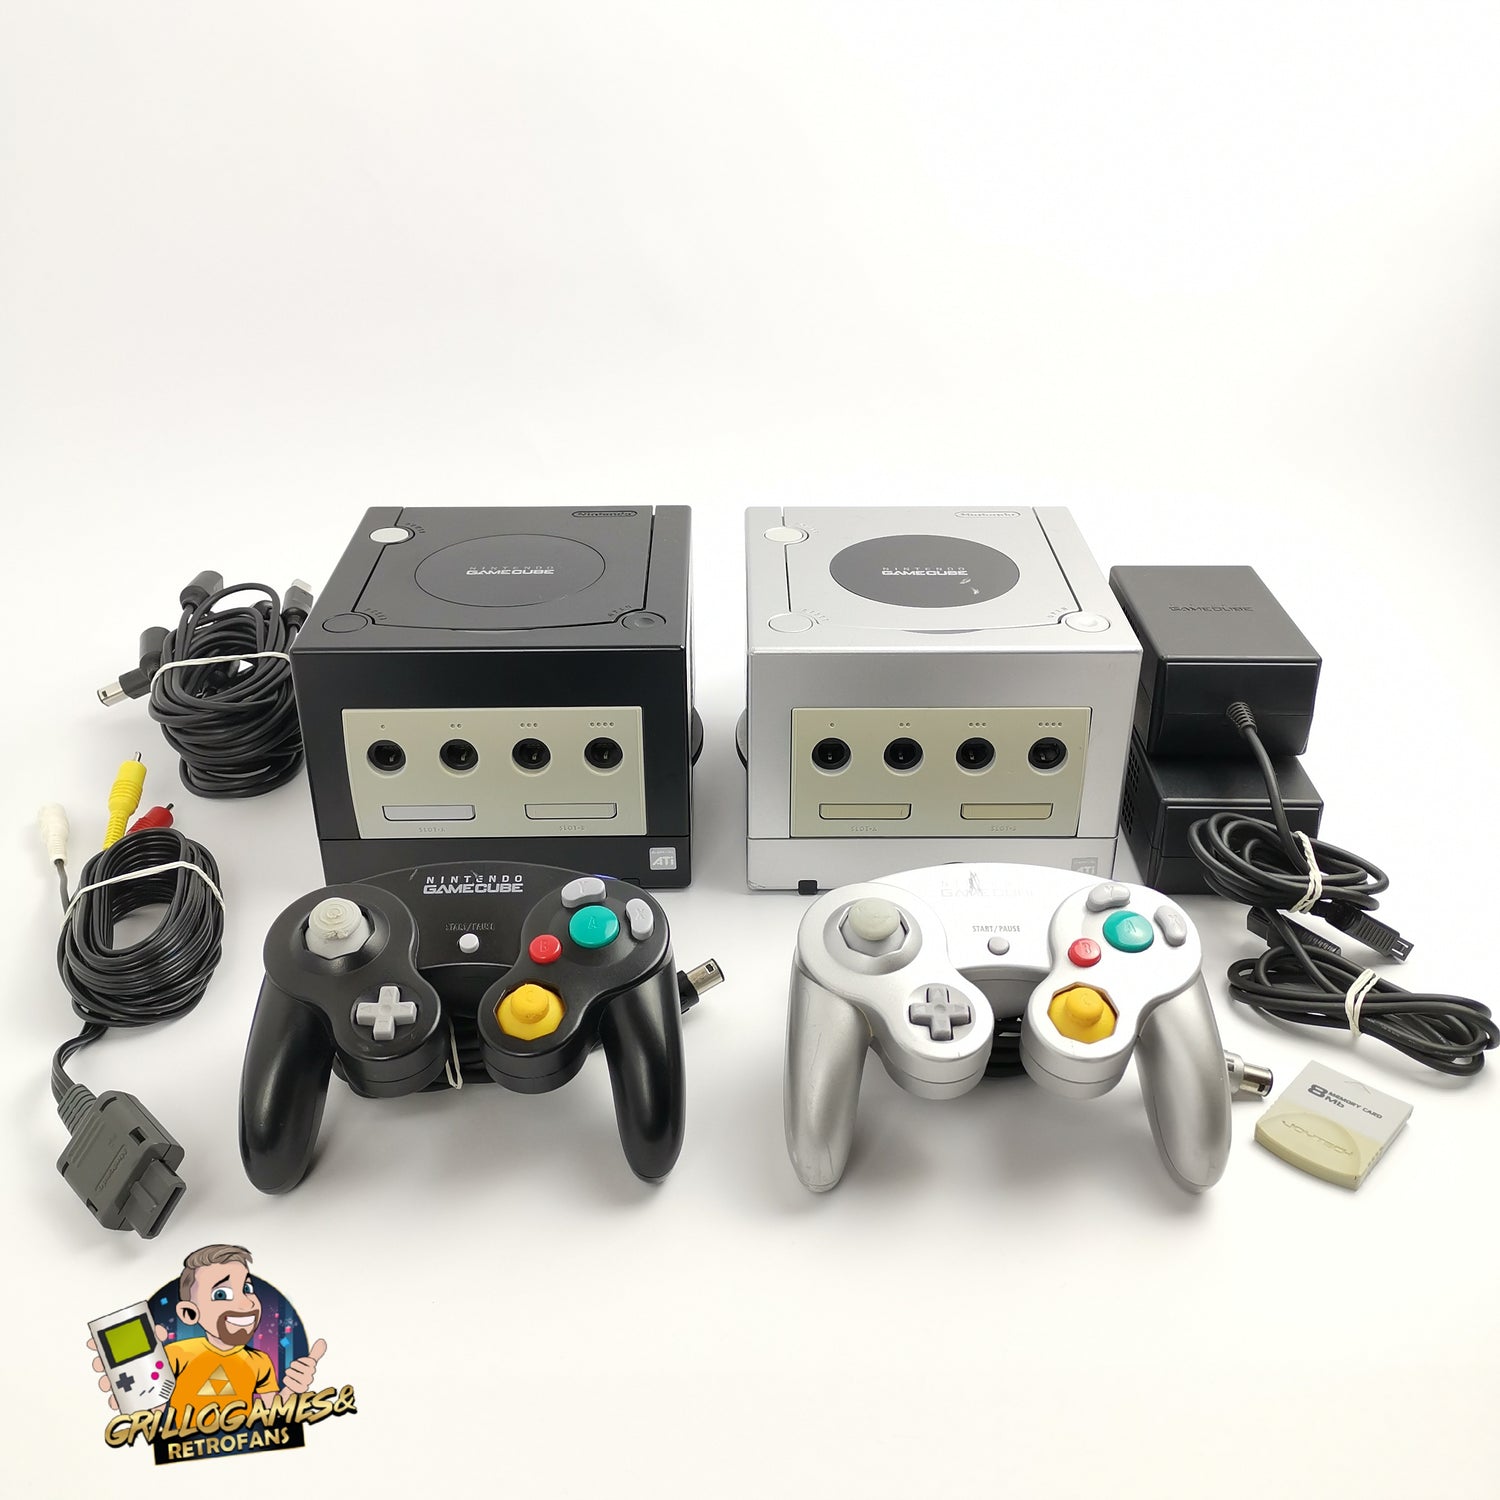 Nintendo Gamecube console bundle: 2 consoles black and silver with accessories